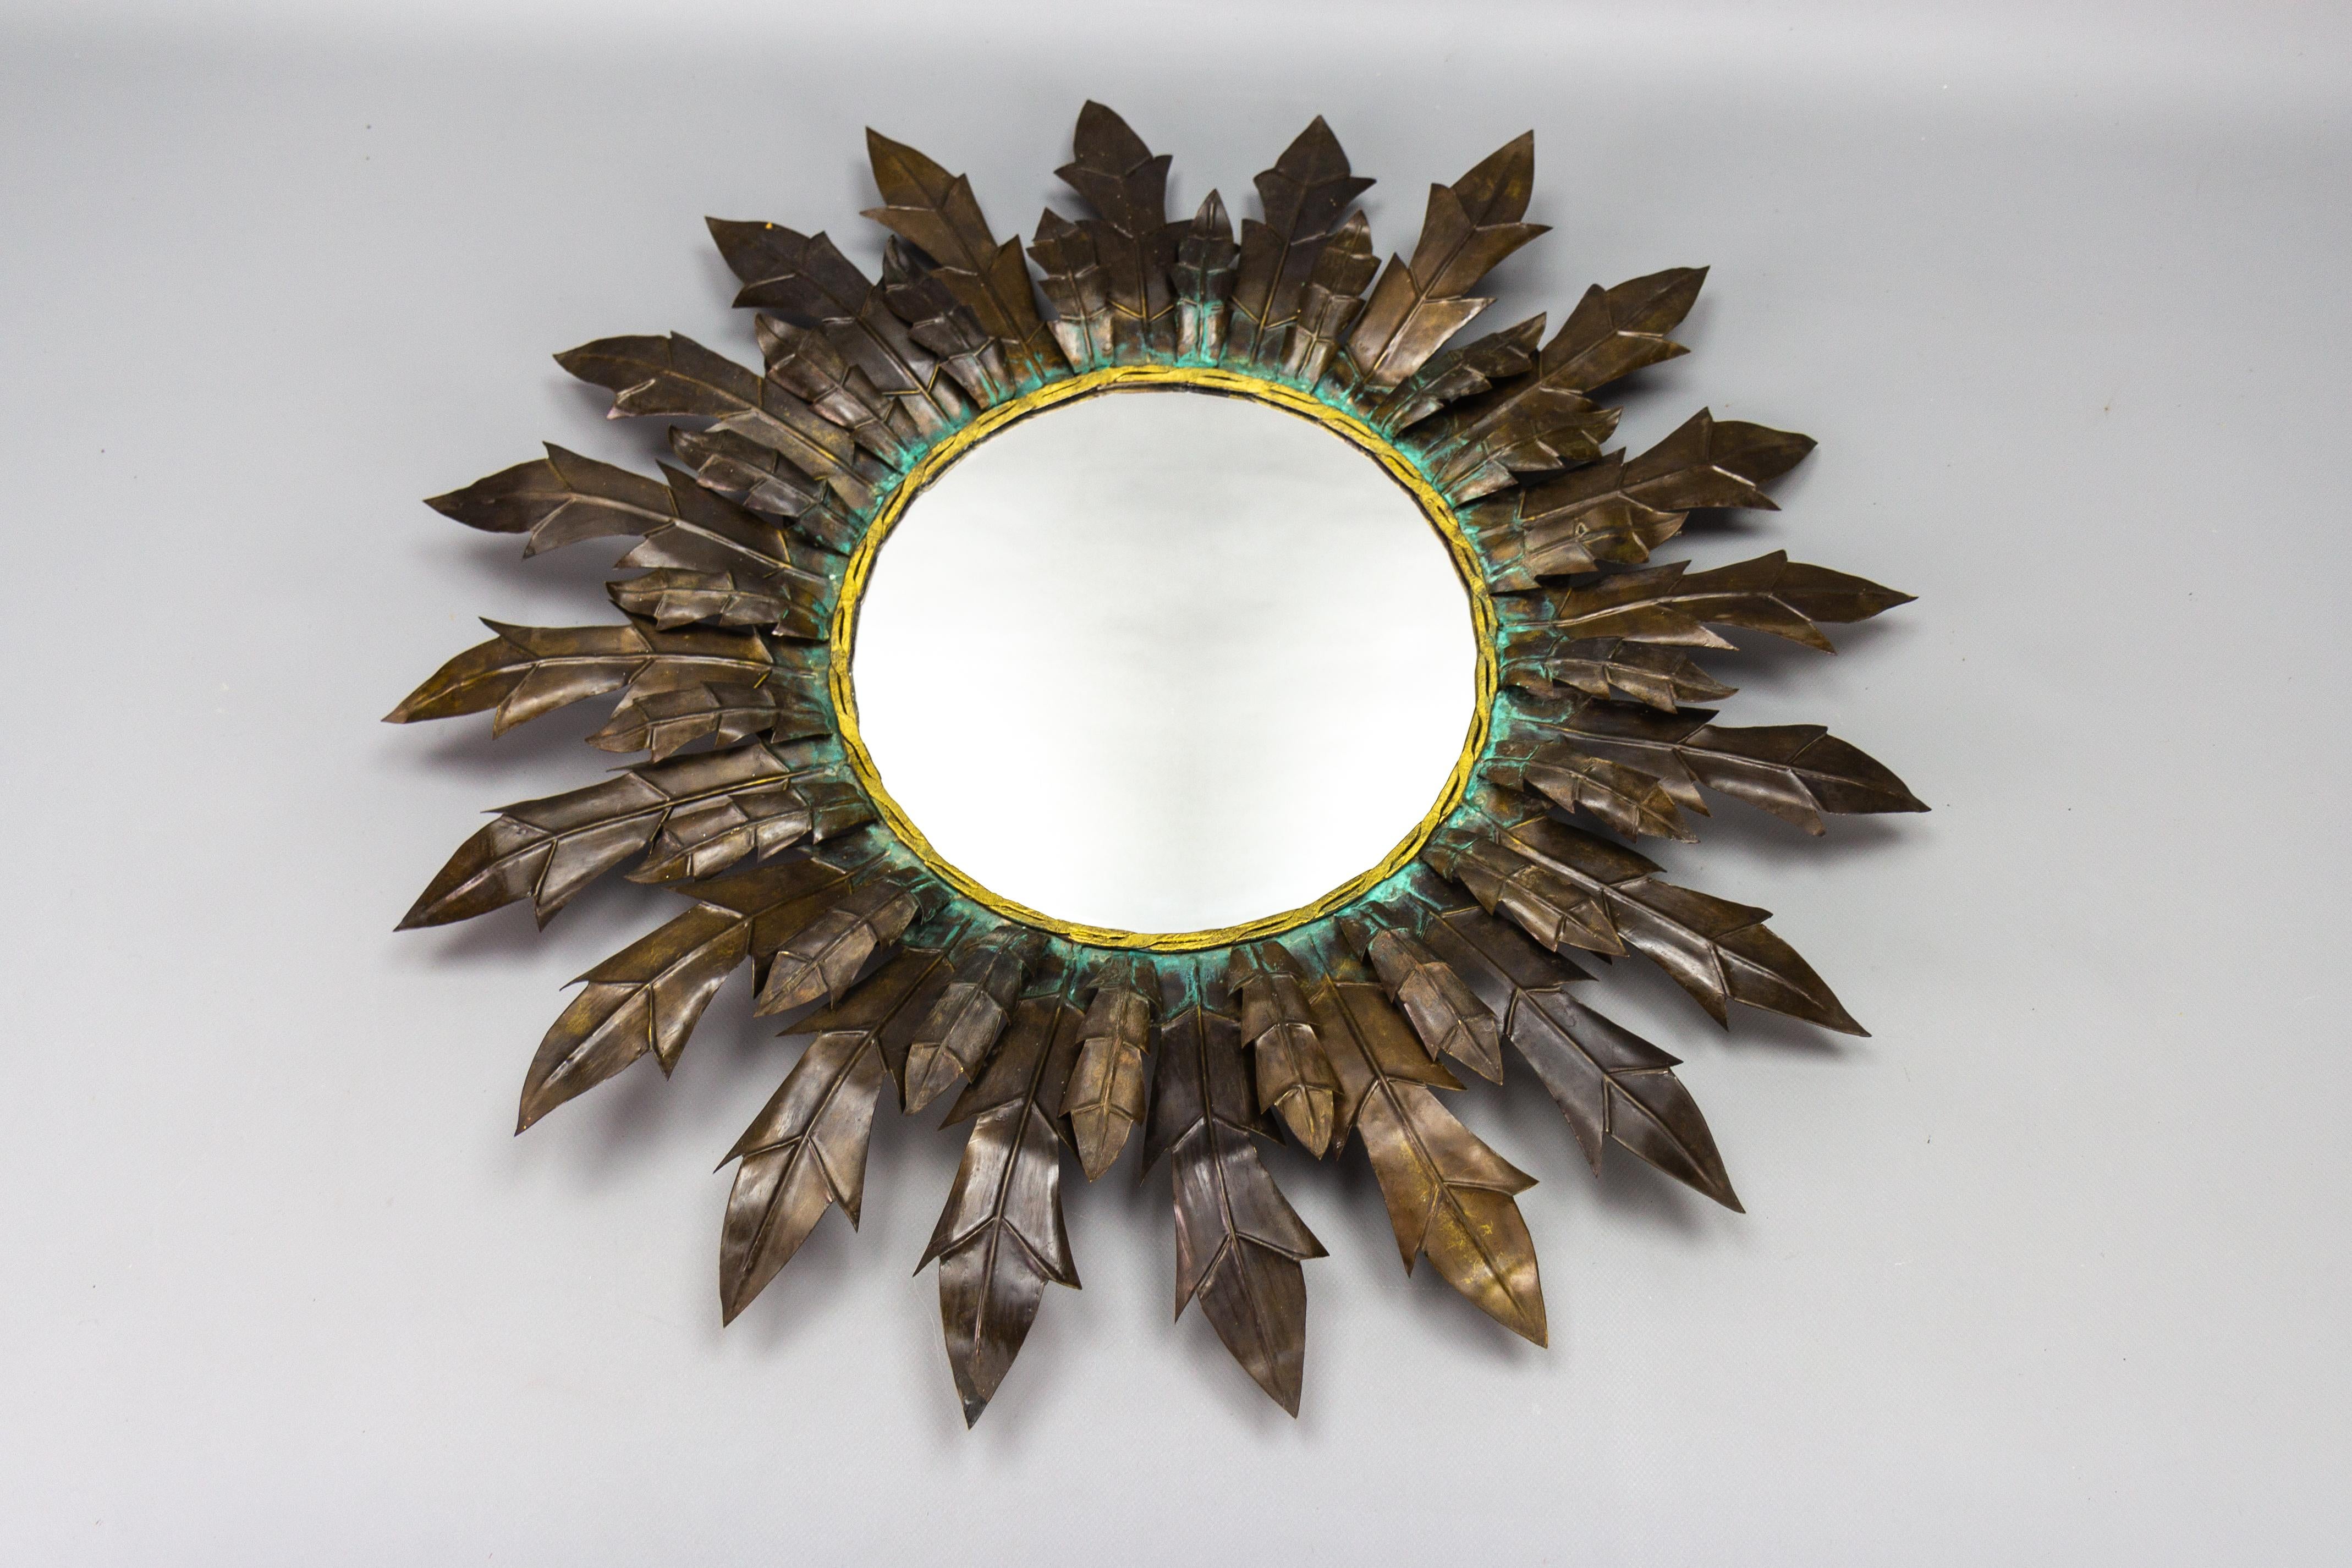 Mid-century Modern copper sheet and brass round sunburst-shaped mirror, Germany, circa the 1950s.
A beautiful sun- or sunburst-shaped round wall mirror with a copper sheet and brass frame with leaf motifs.
Dimensions: diameter: 65 cm / 25.6 in;